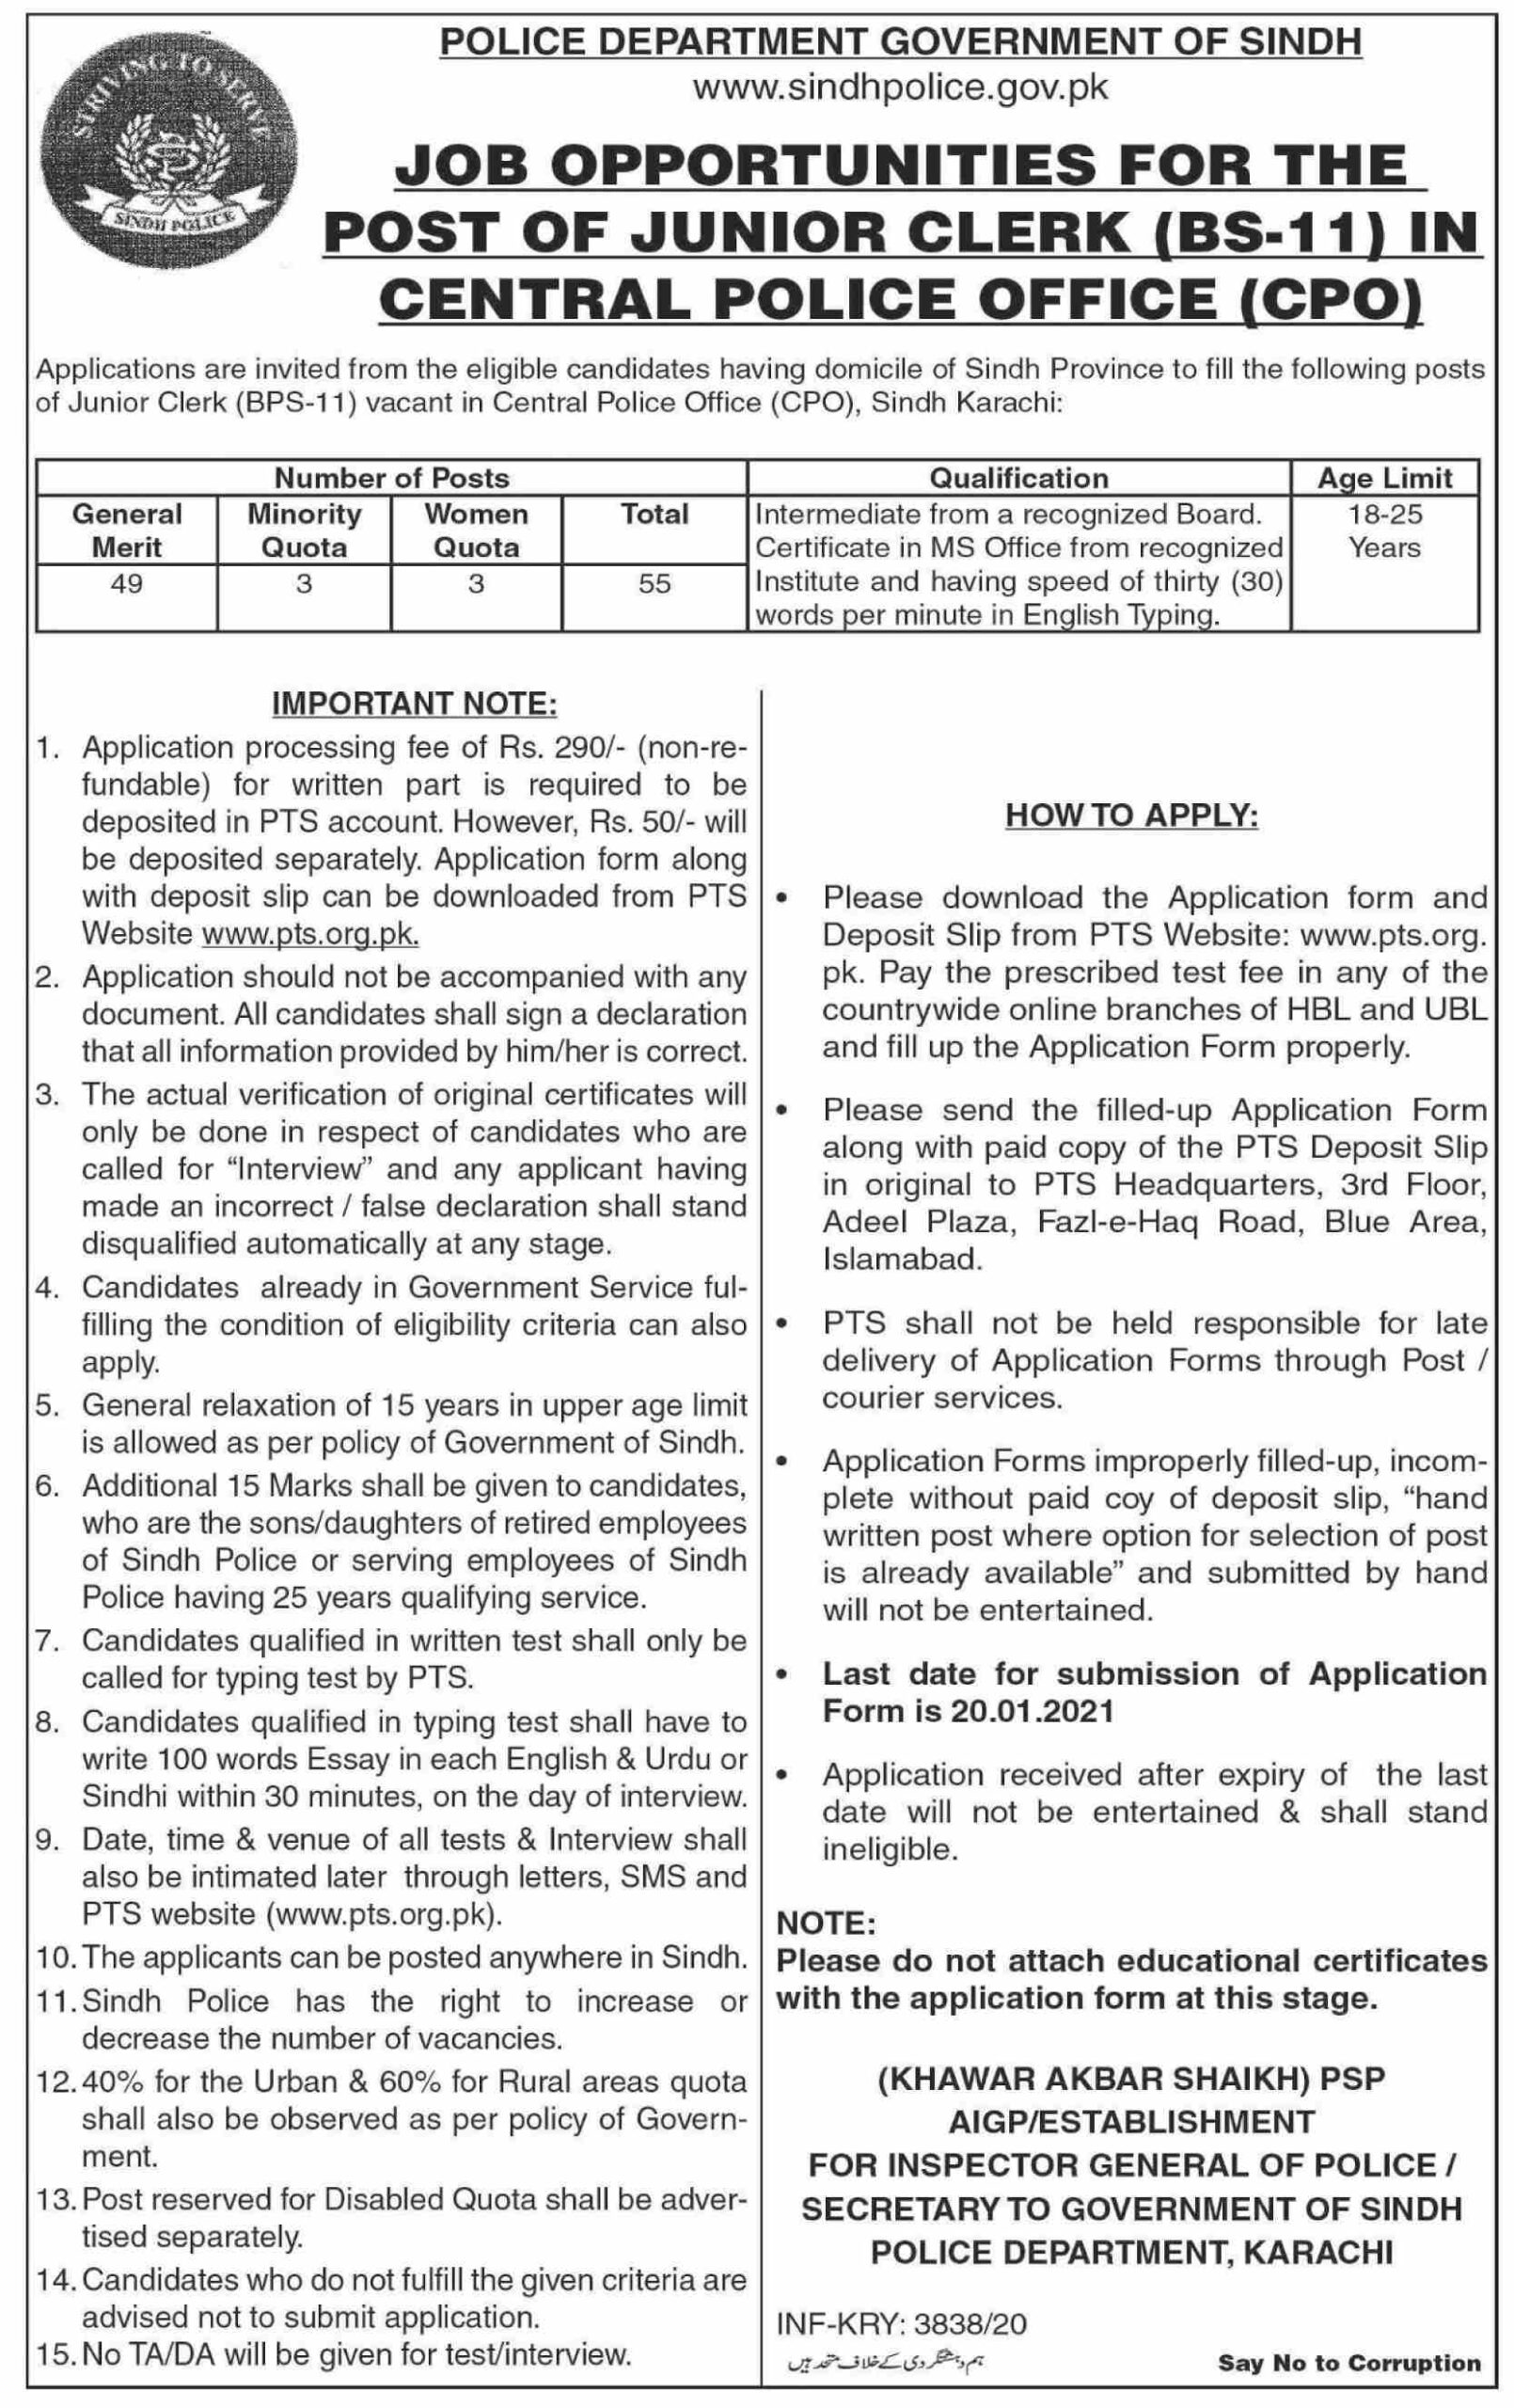 Police Department Government of Sindh Jobs 2021